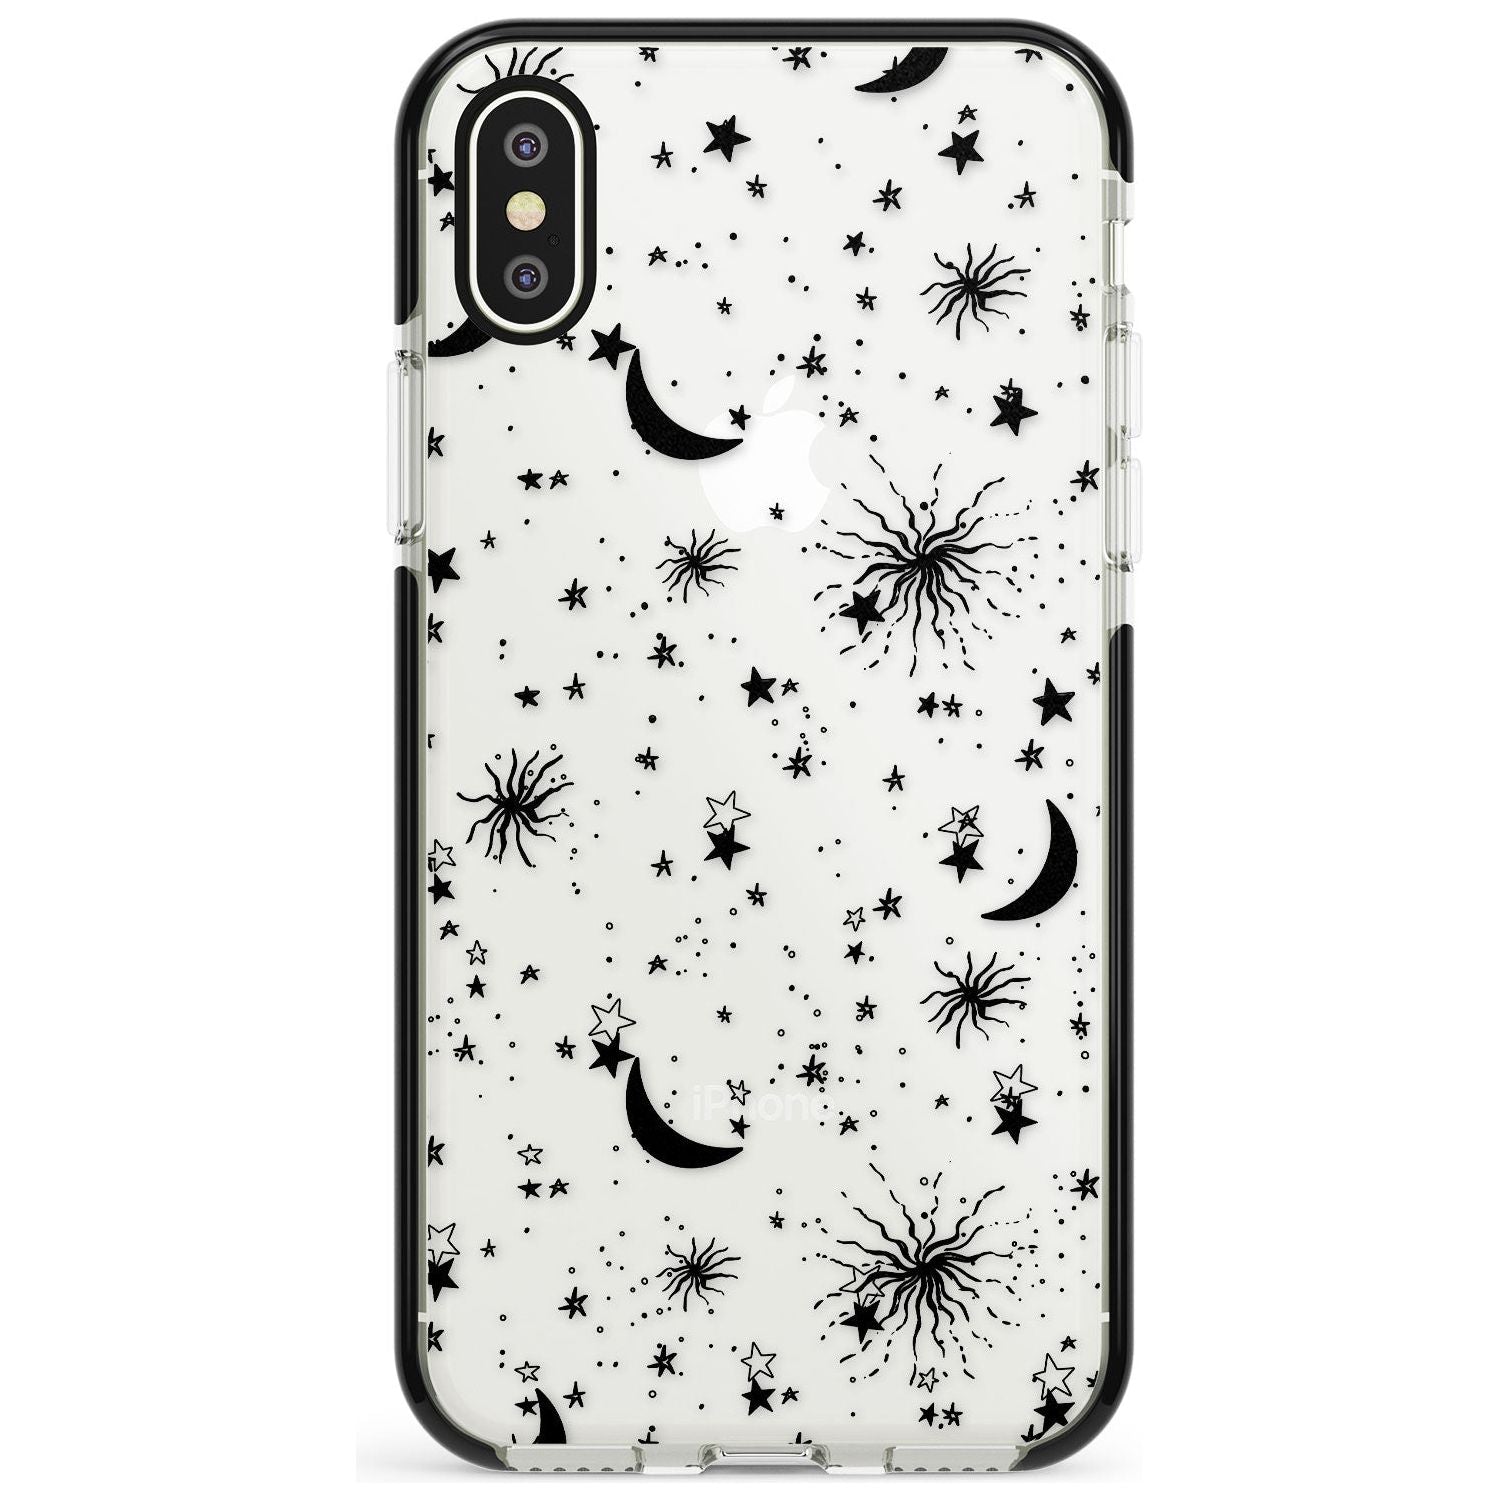 Moons & Stars Black Impact Phone Case for iPhone X XS Max XR